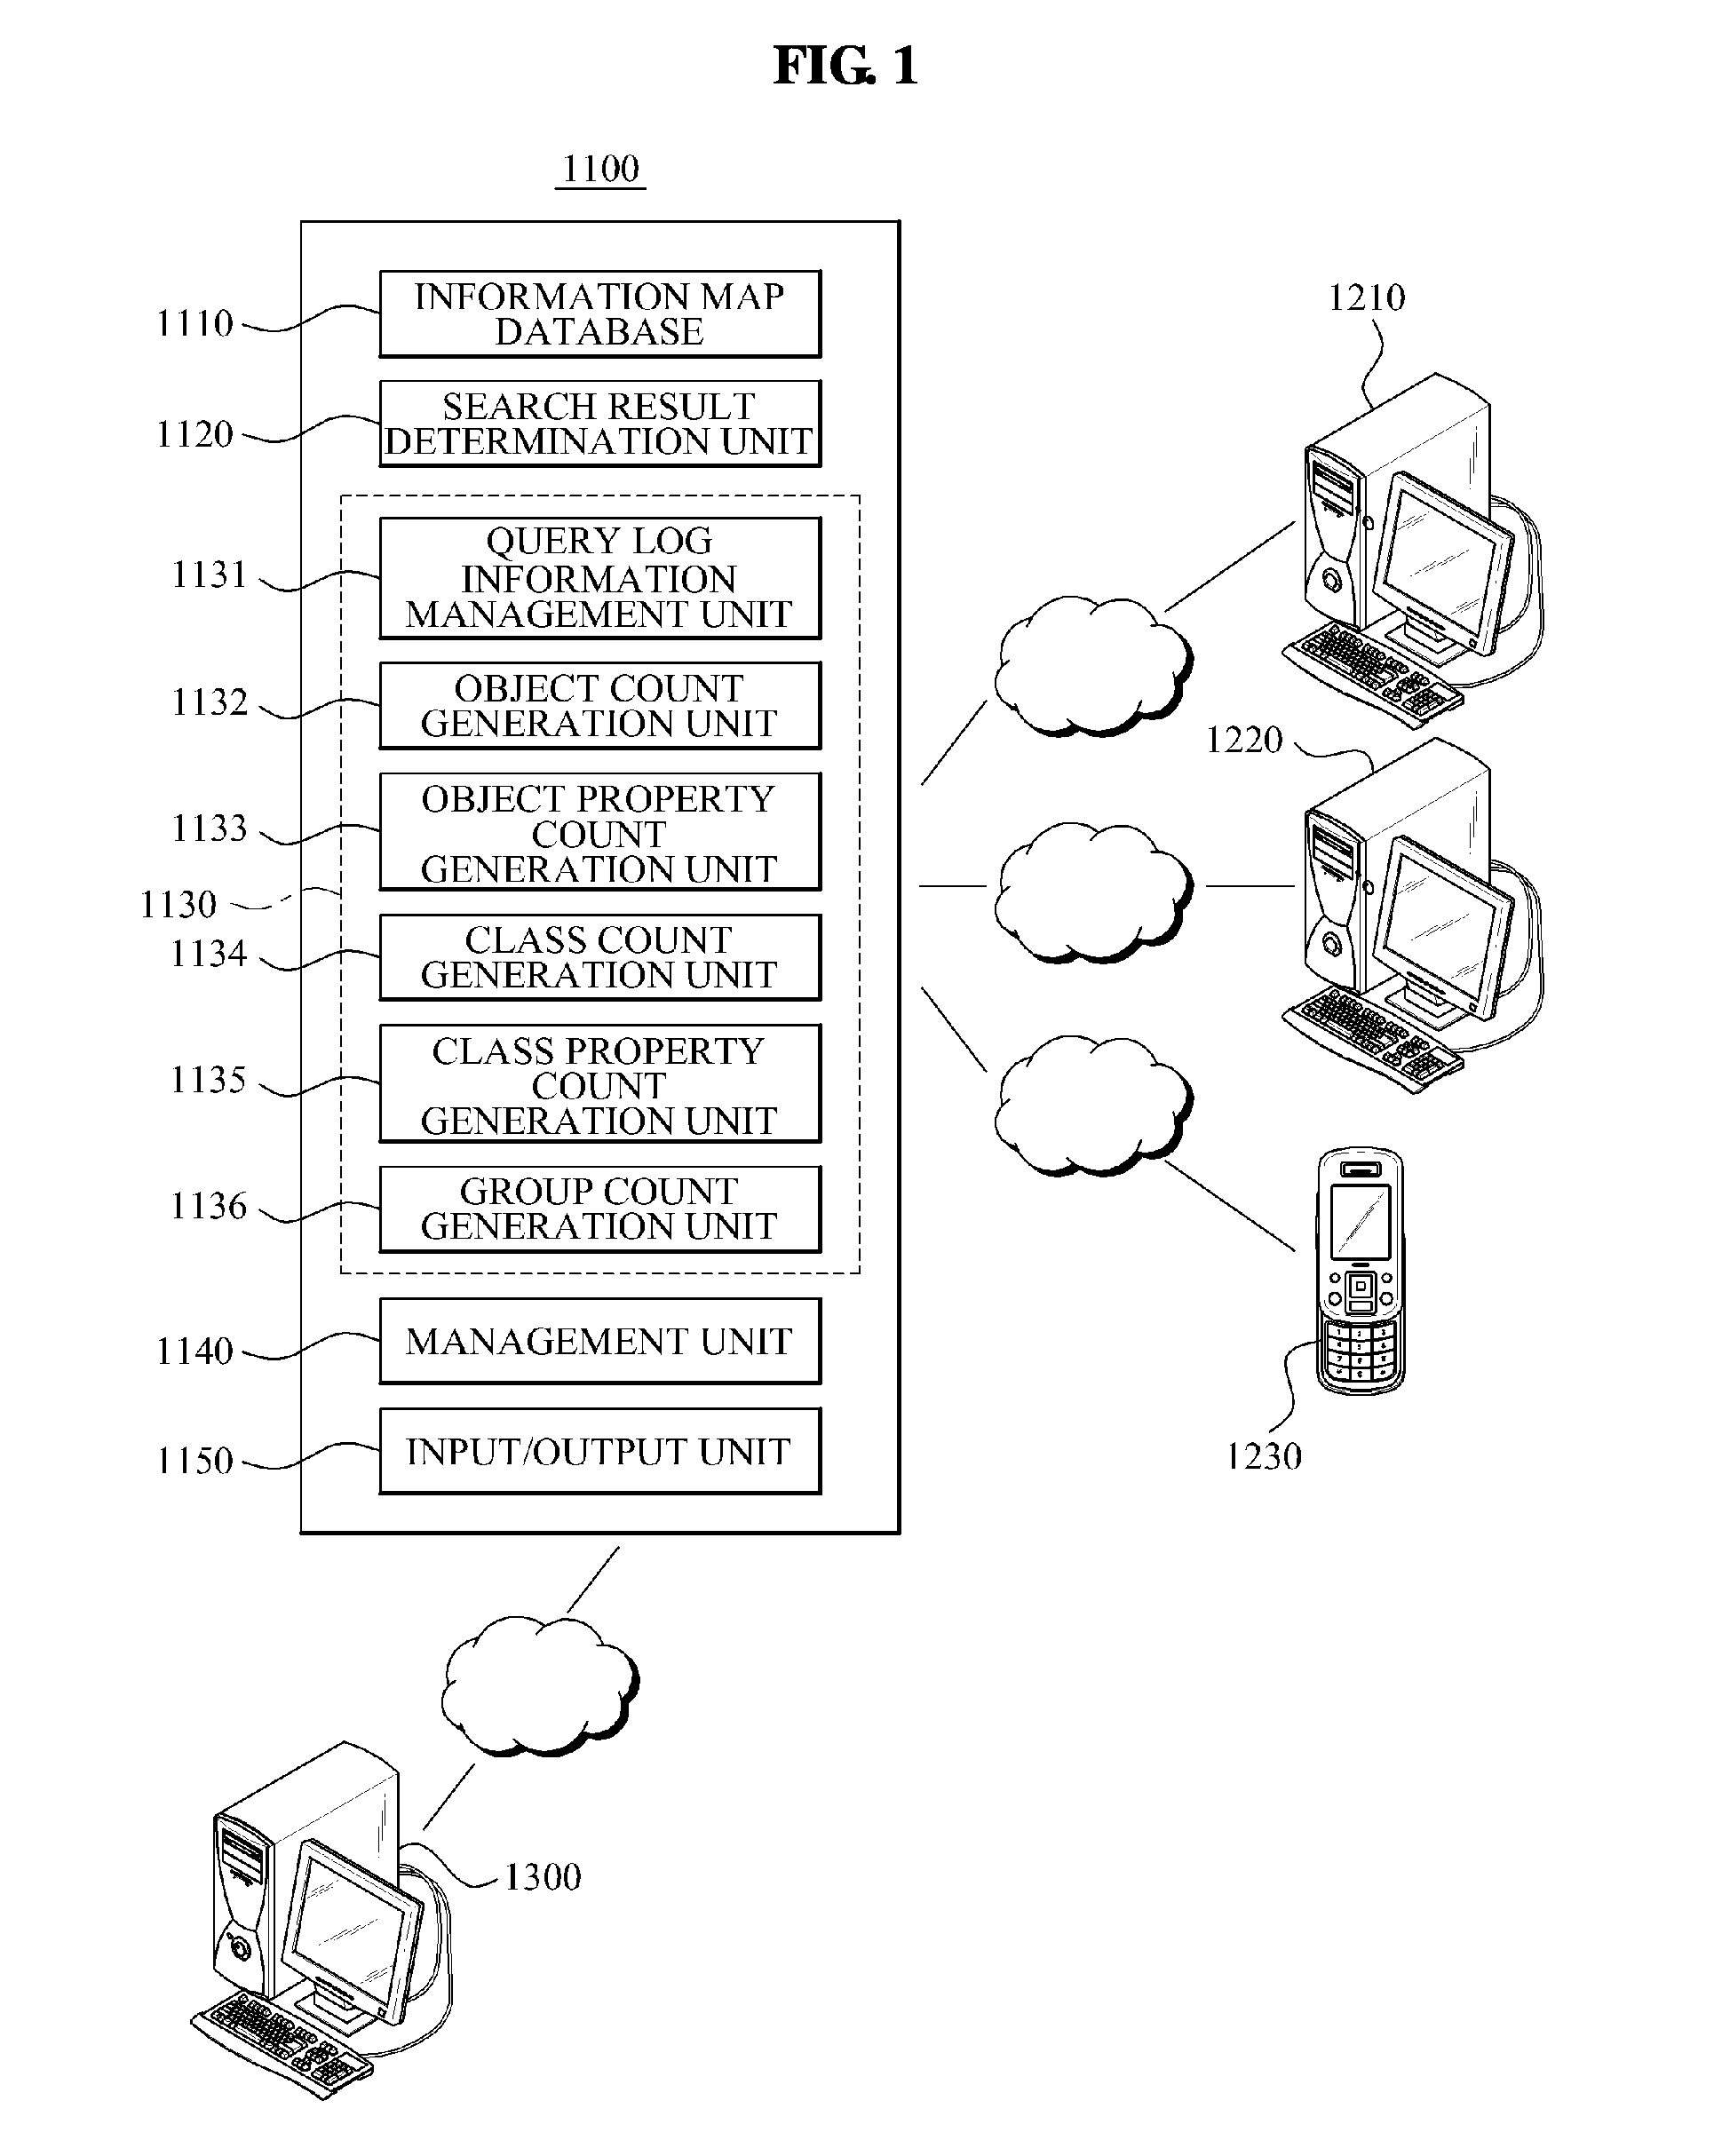 System and method for managing information map